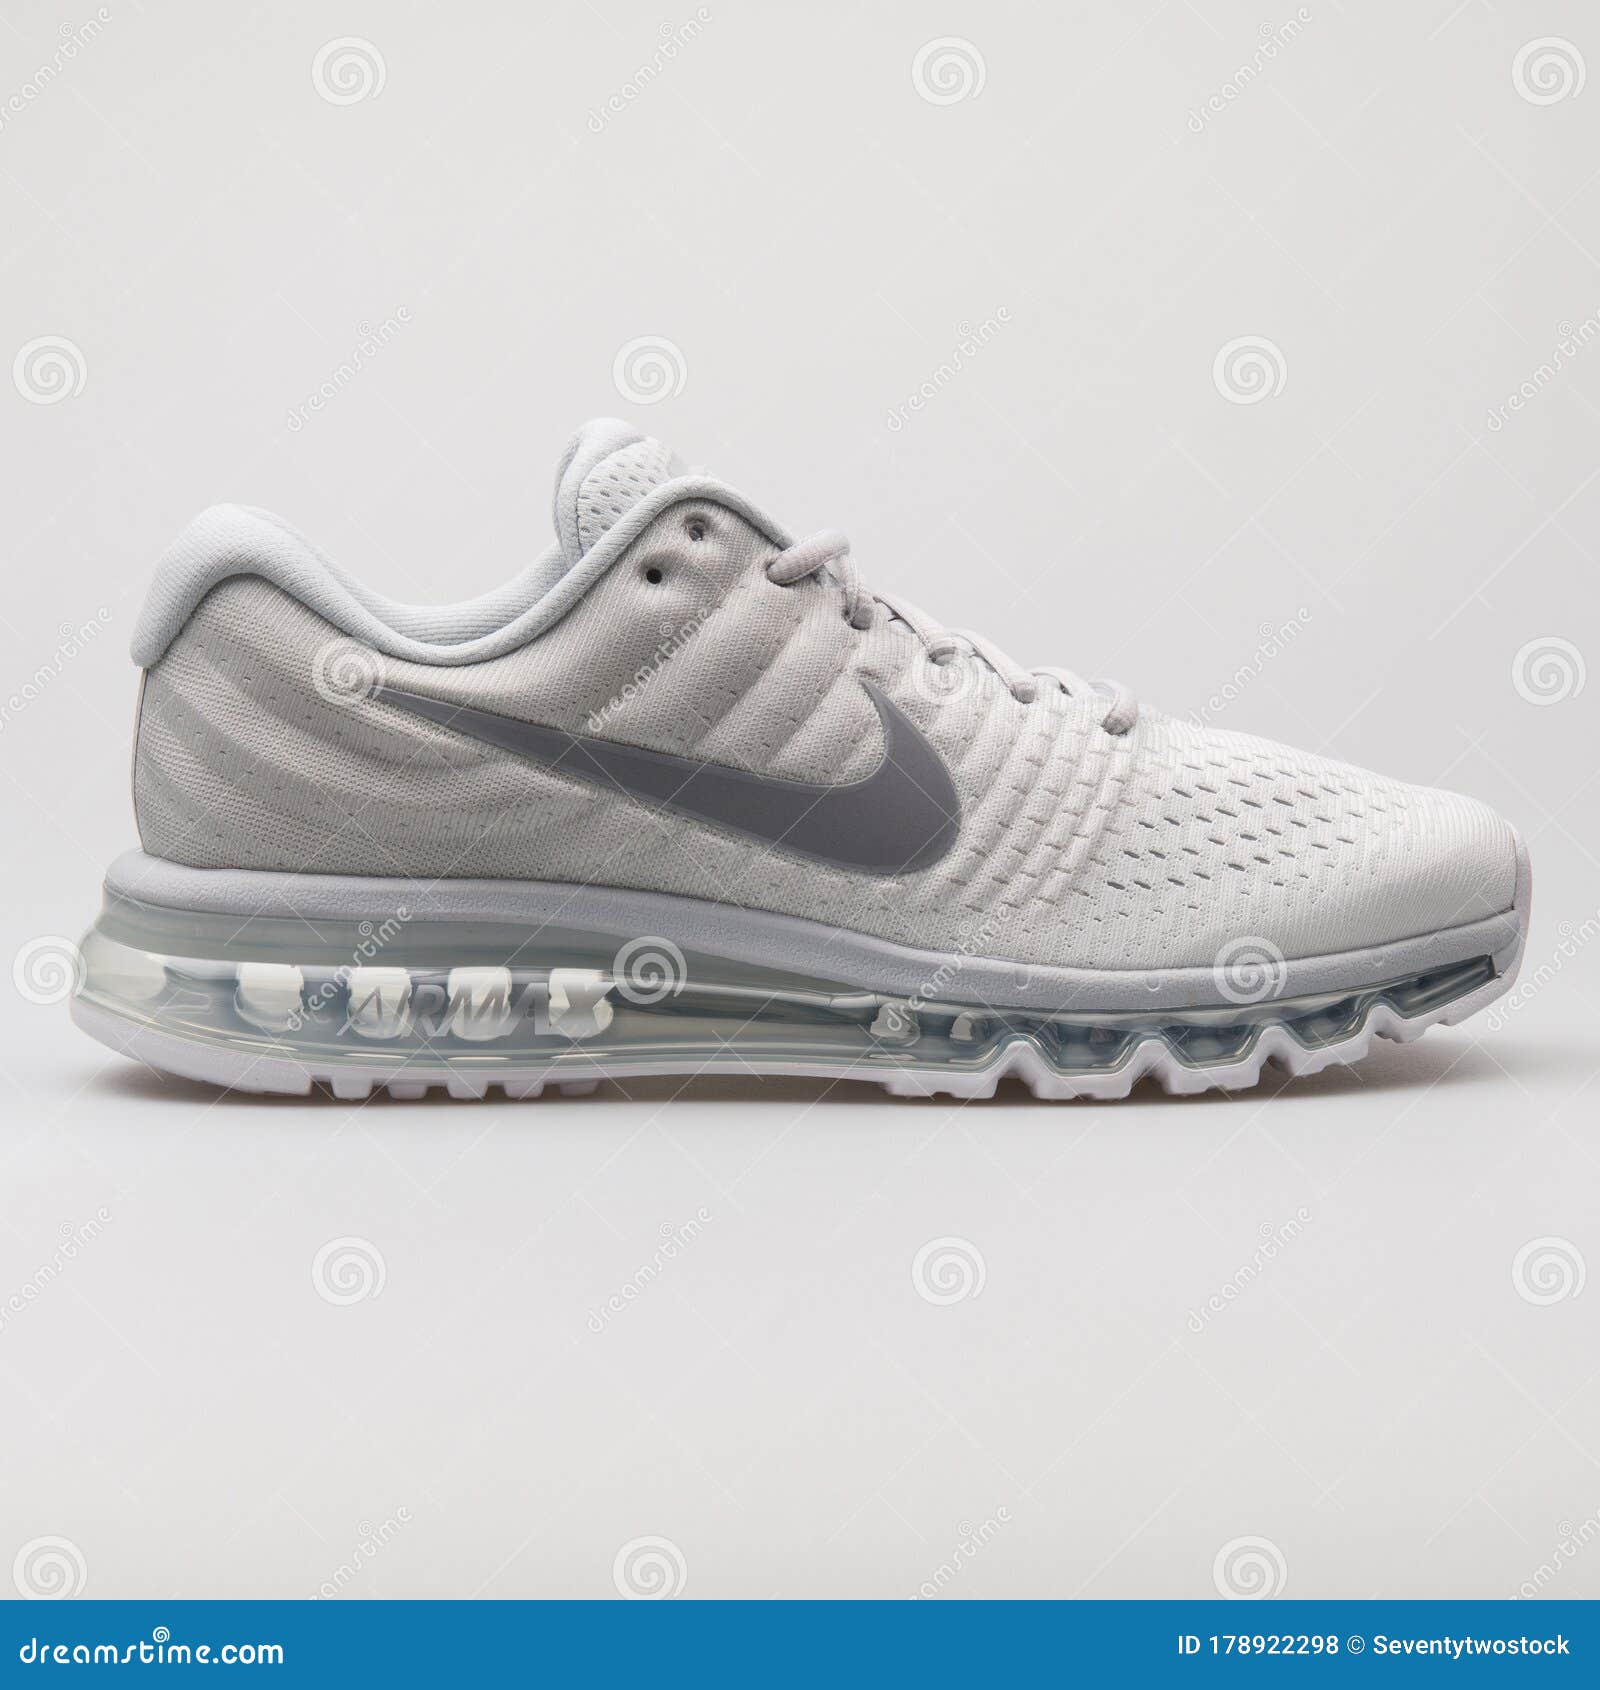 Joseph Banks Doctrine zone Nike Air Max 2017 Platinum, Grey and White Sneaker Editorial Stock Photo -  Image of background, fitness: 178922298